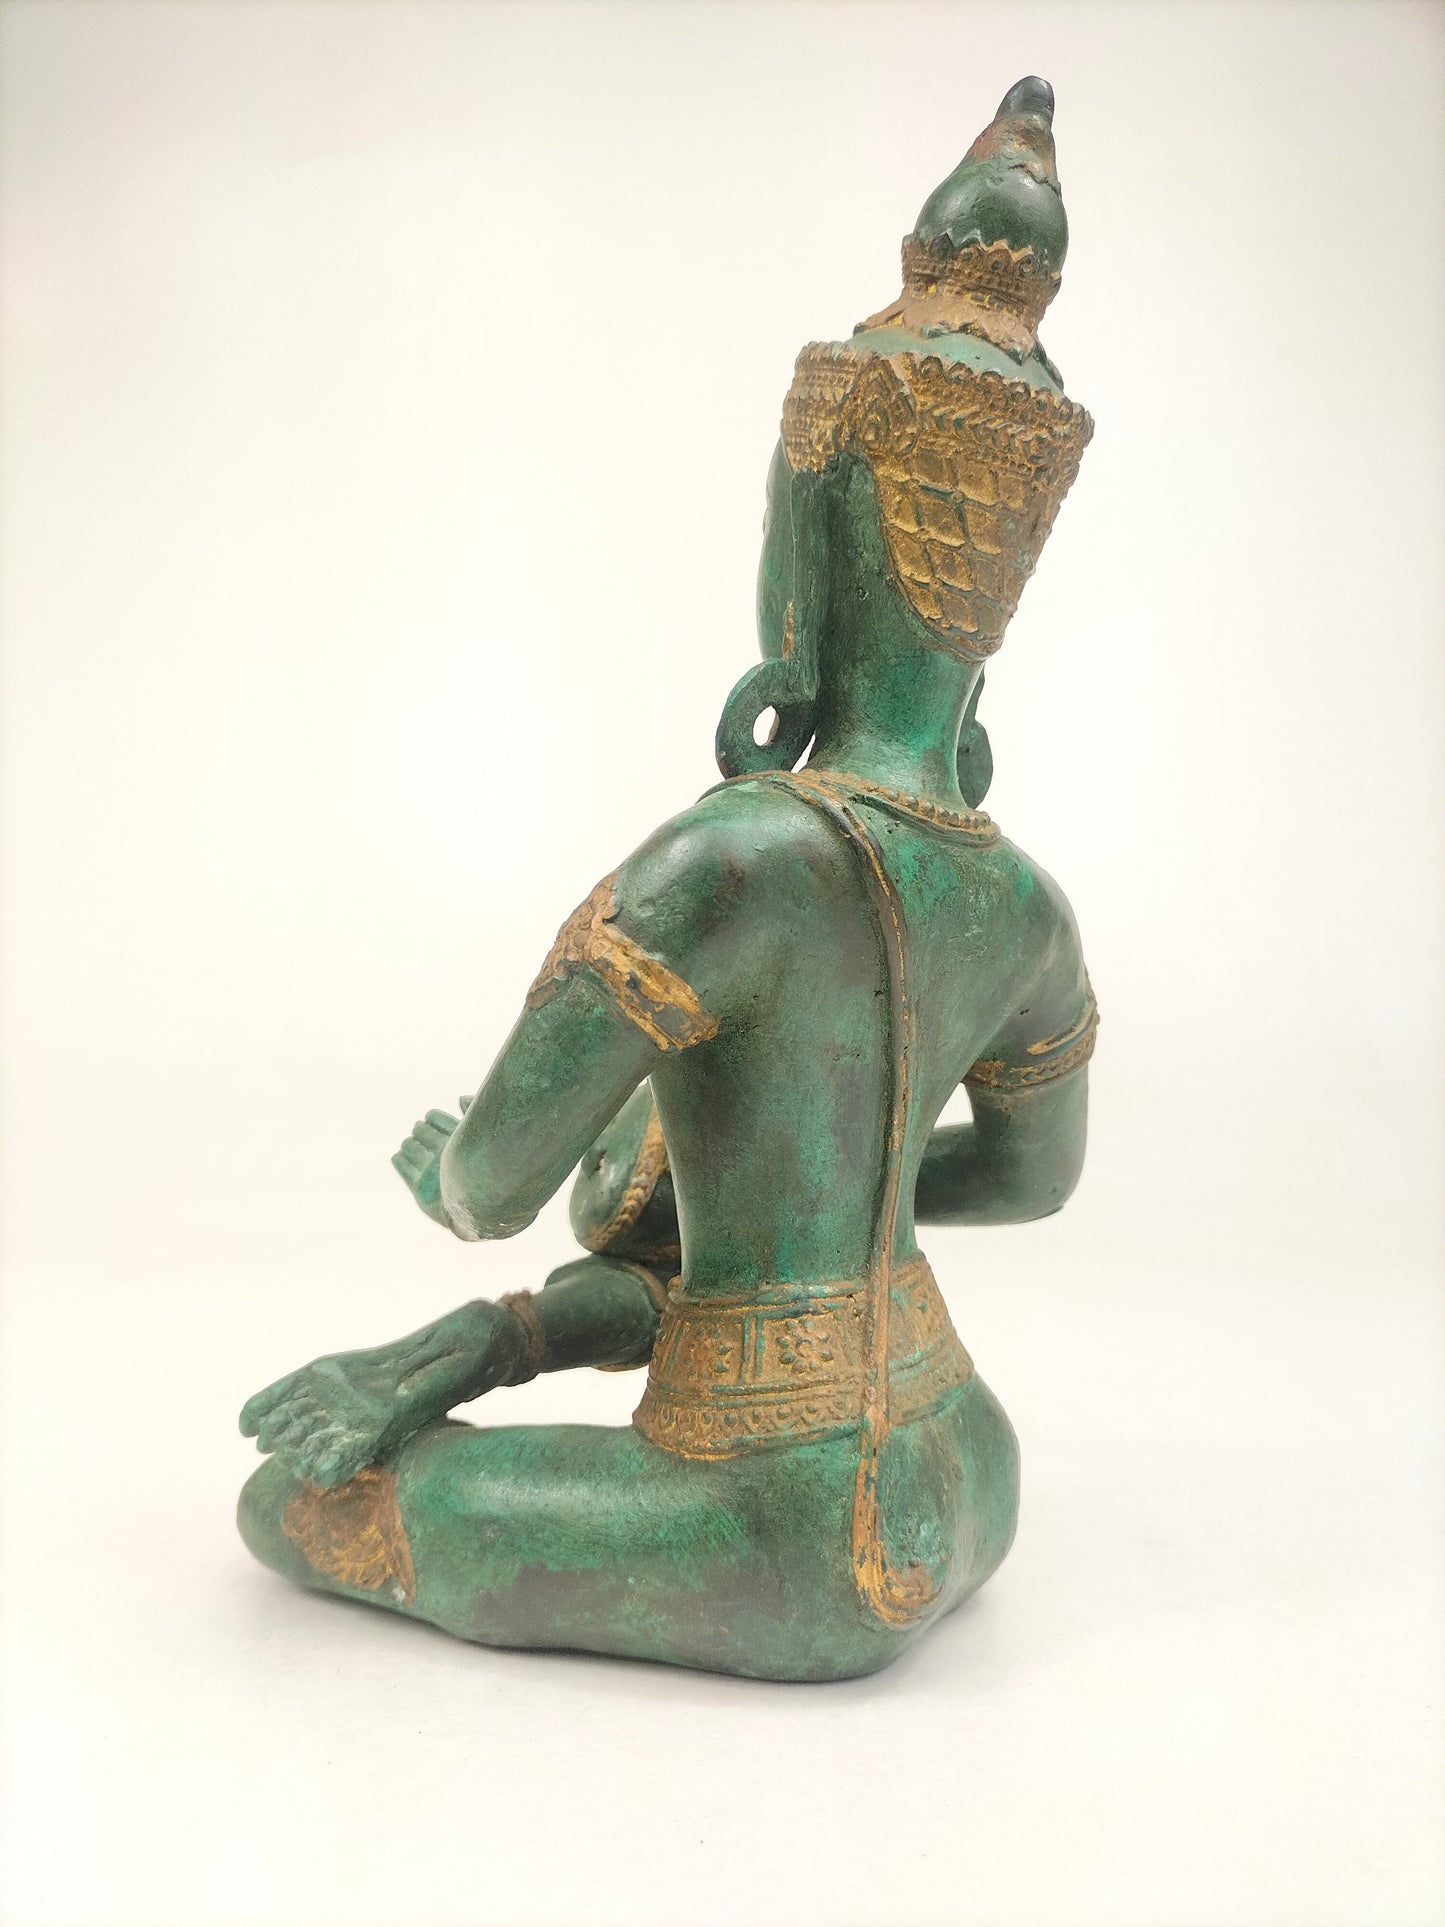 Bronze gilded buddha statue of a temple guardian // Thaliand - 20th century